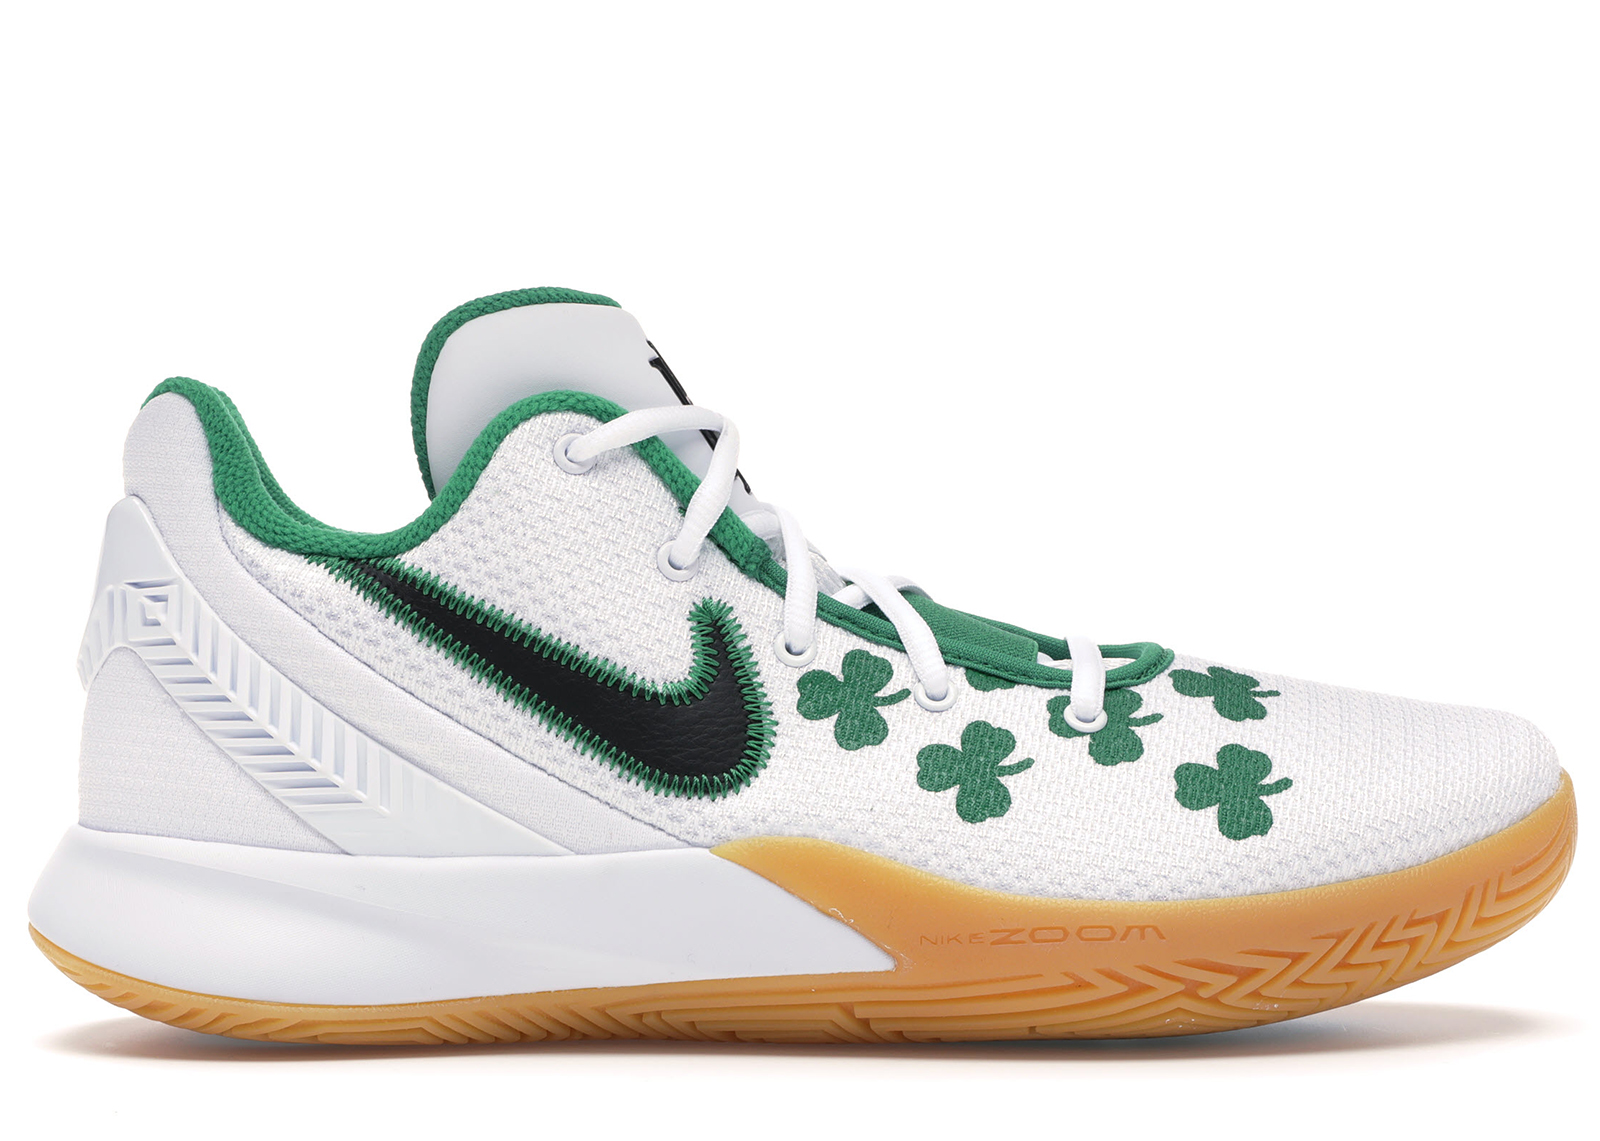 nike kyrie flytrap 2 green and white